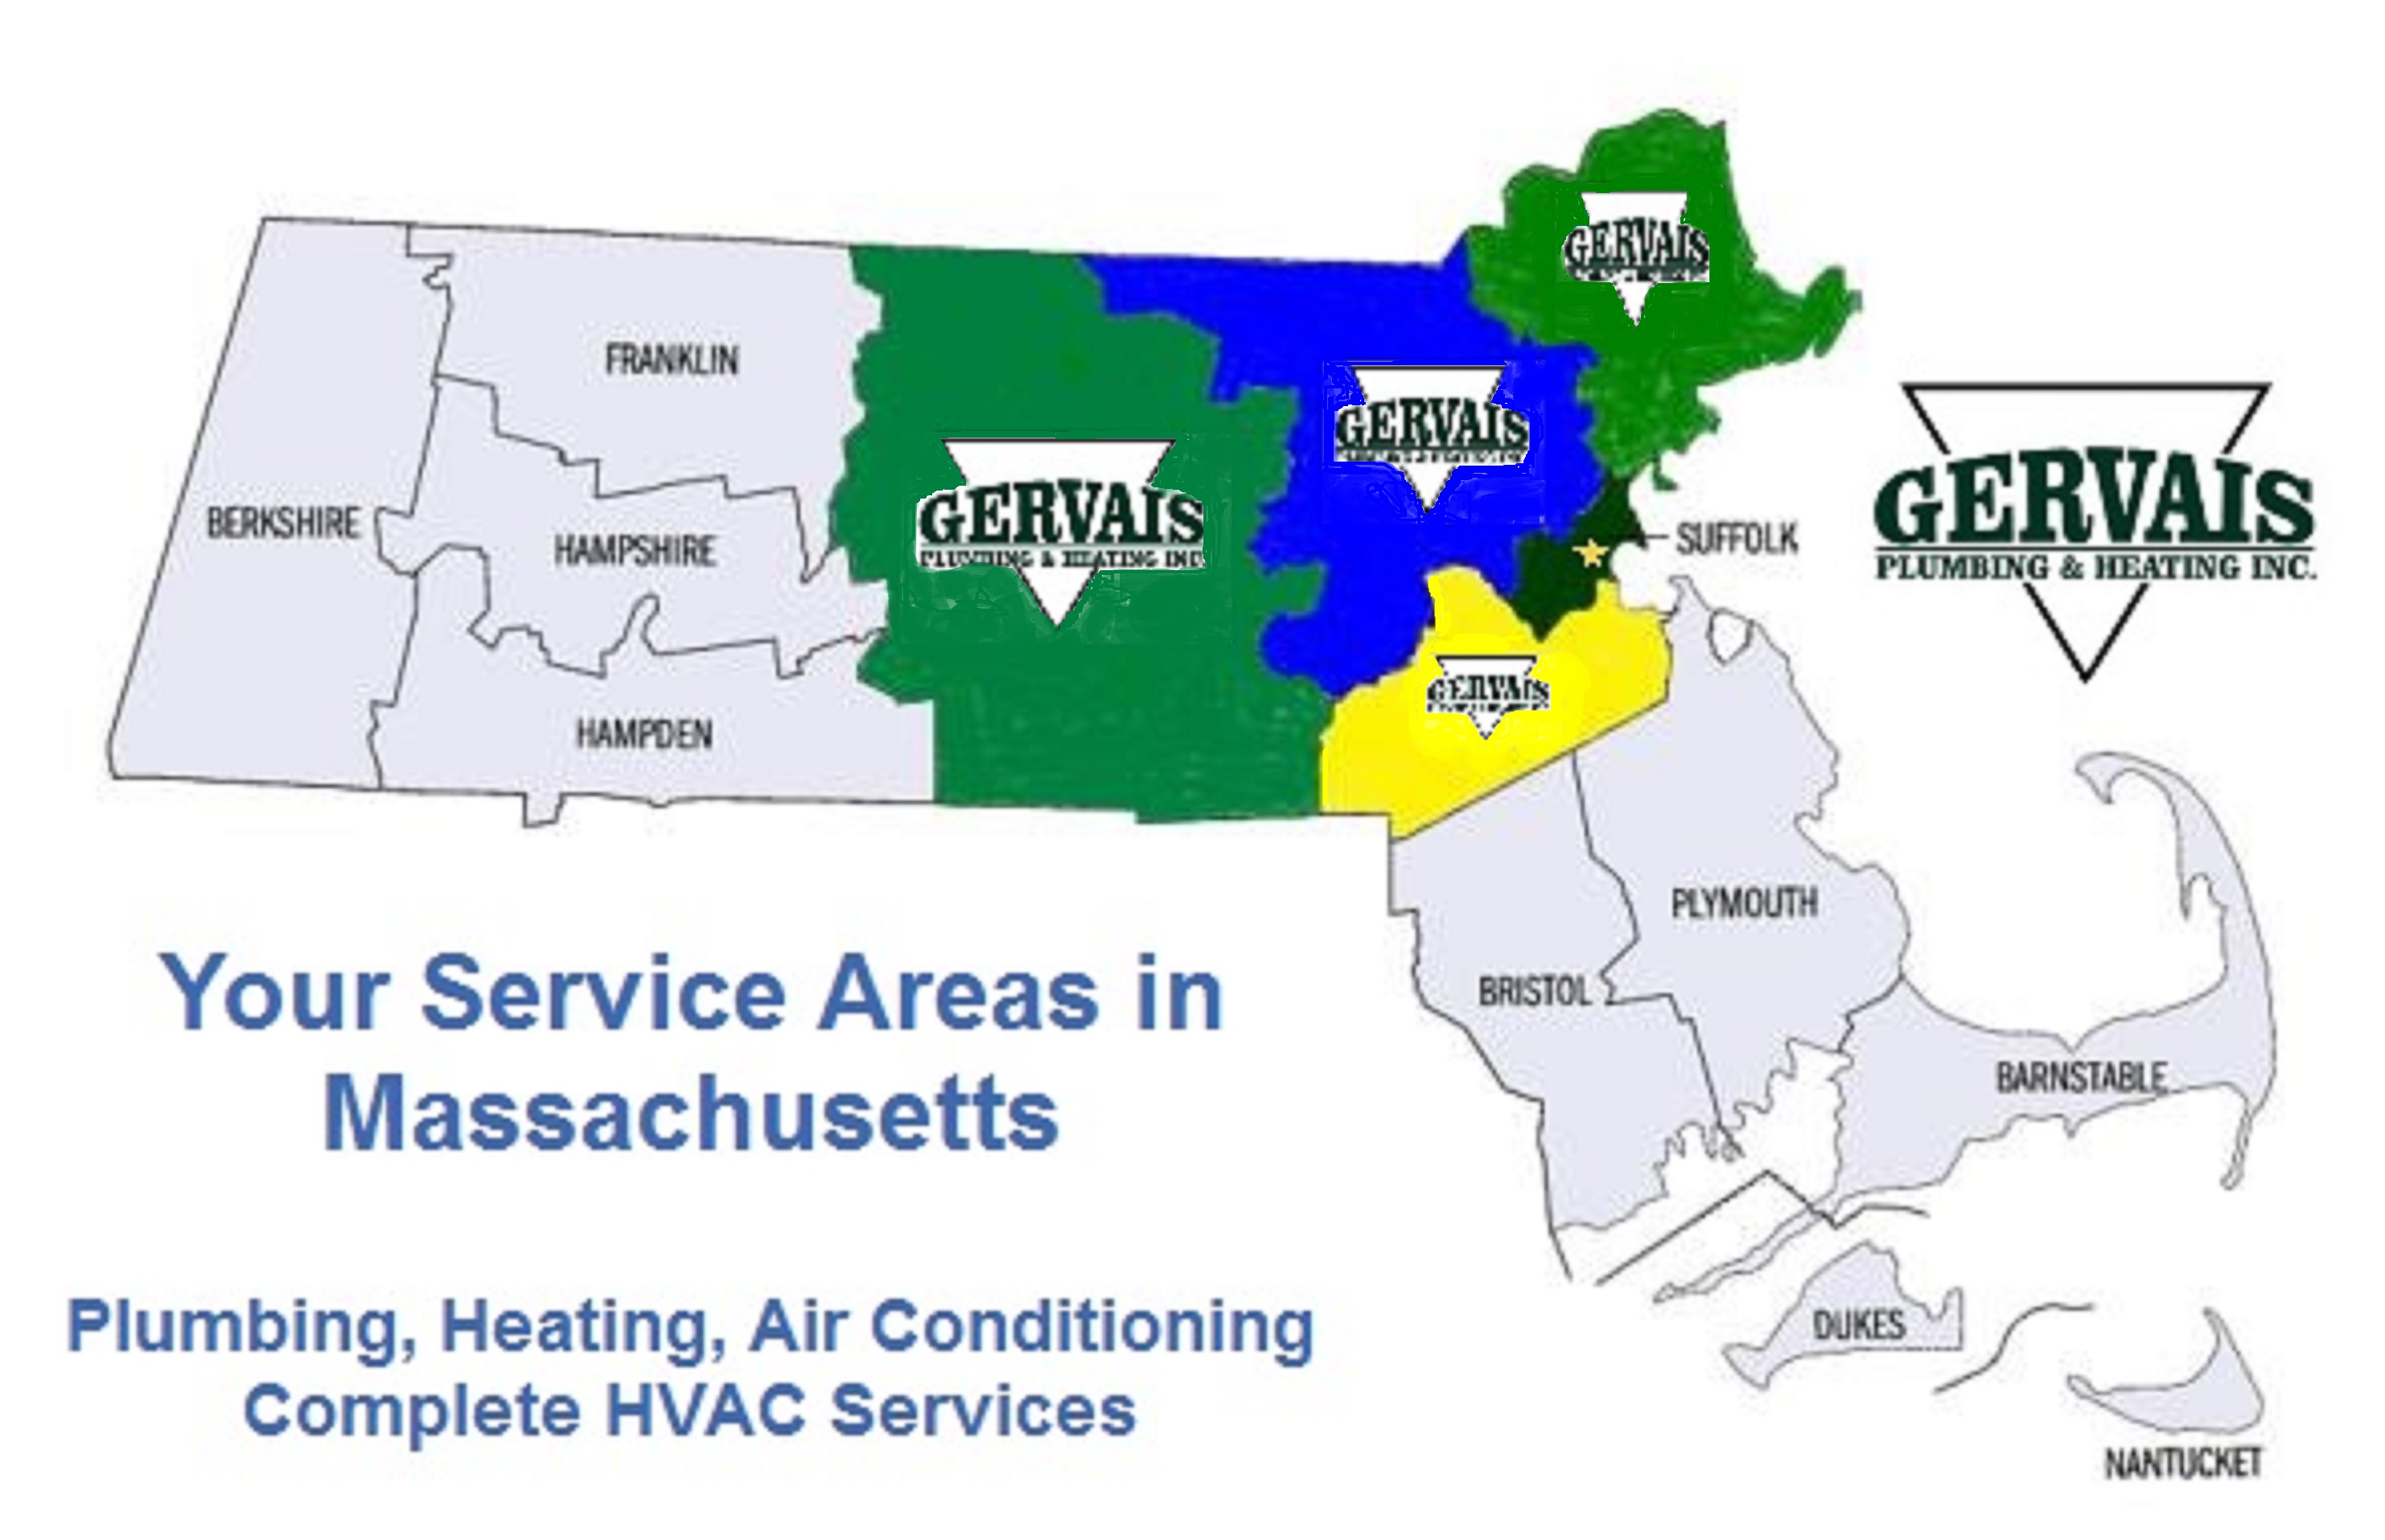 Gervais Plumbing Heating & Air Conditioning Pays The Highest Salaries For Qualified HVAC Journeymen in Worcester/Boston, Massachusetts With Highest Pay and Full Benefits!